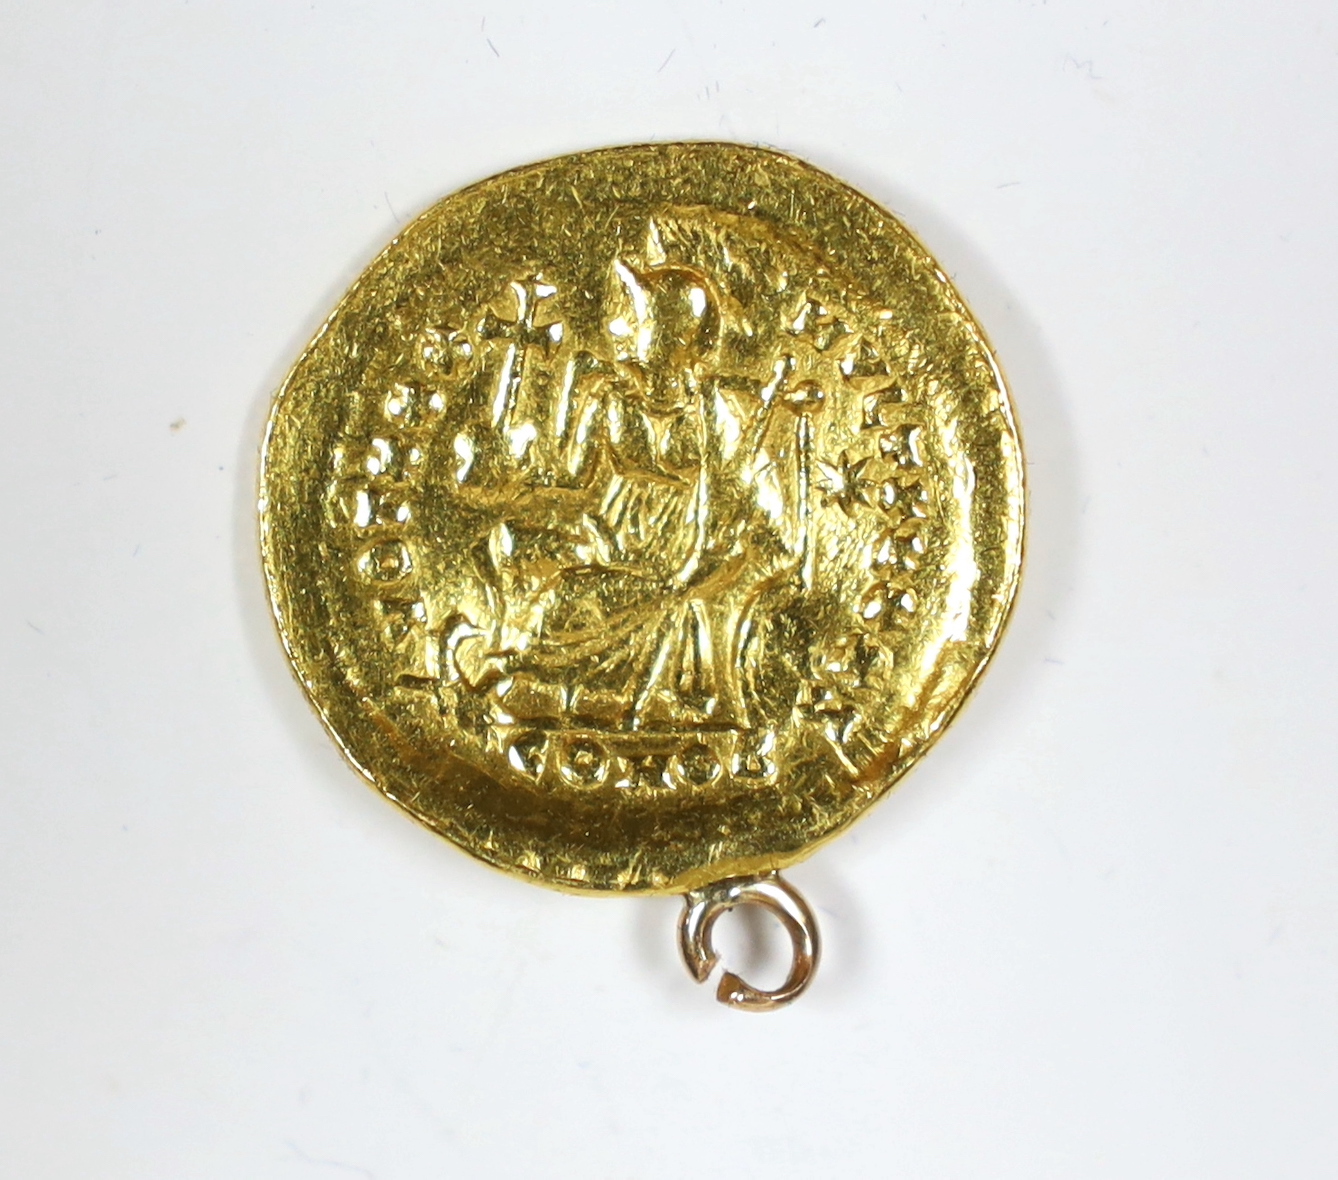 Ancient hammered coins, Theodosius II gold solidus Constantinople 402-450AD, later mounted otherwise VG or better, 4.45g gross